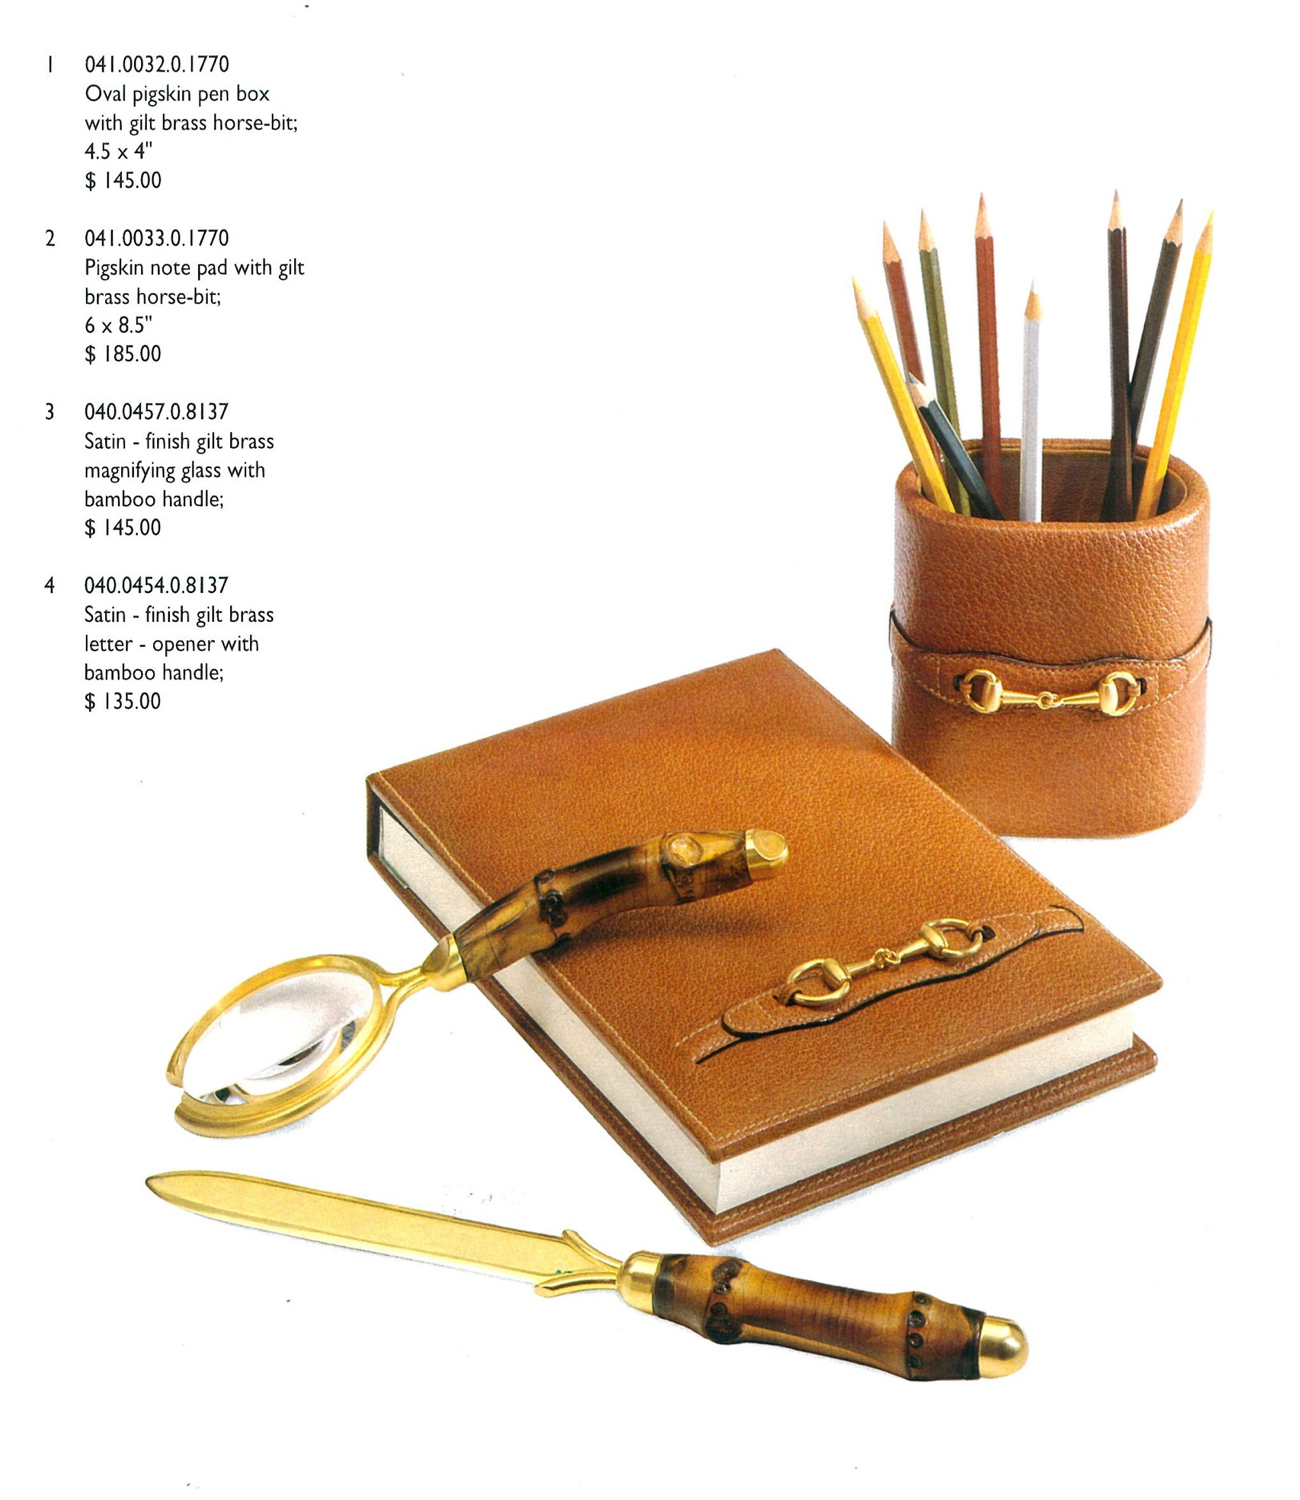 Gucci Housewares Desk Leather Accesories 1995 featuring Pigskin Pencup, Desk Pad, Magnifying Glass and Letter Opener with Bamboo Handle